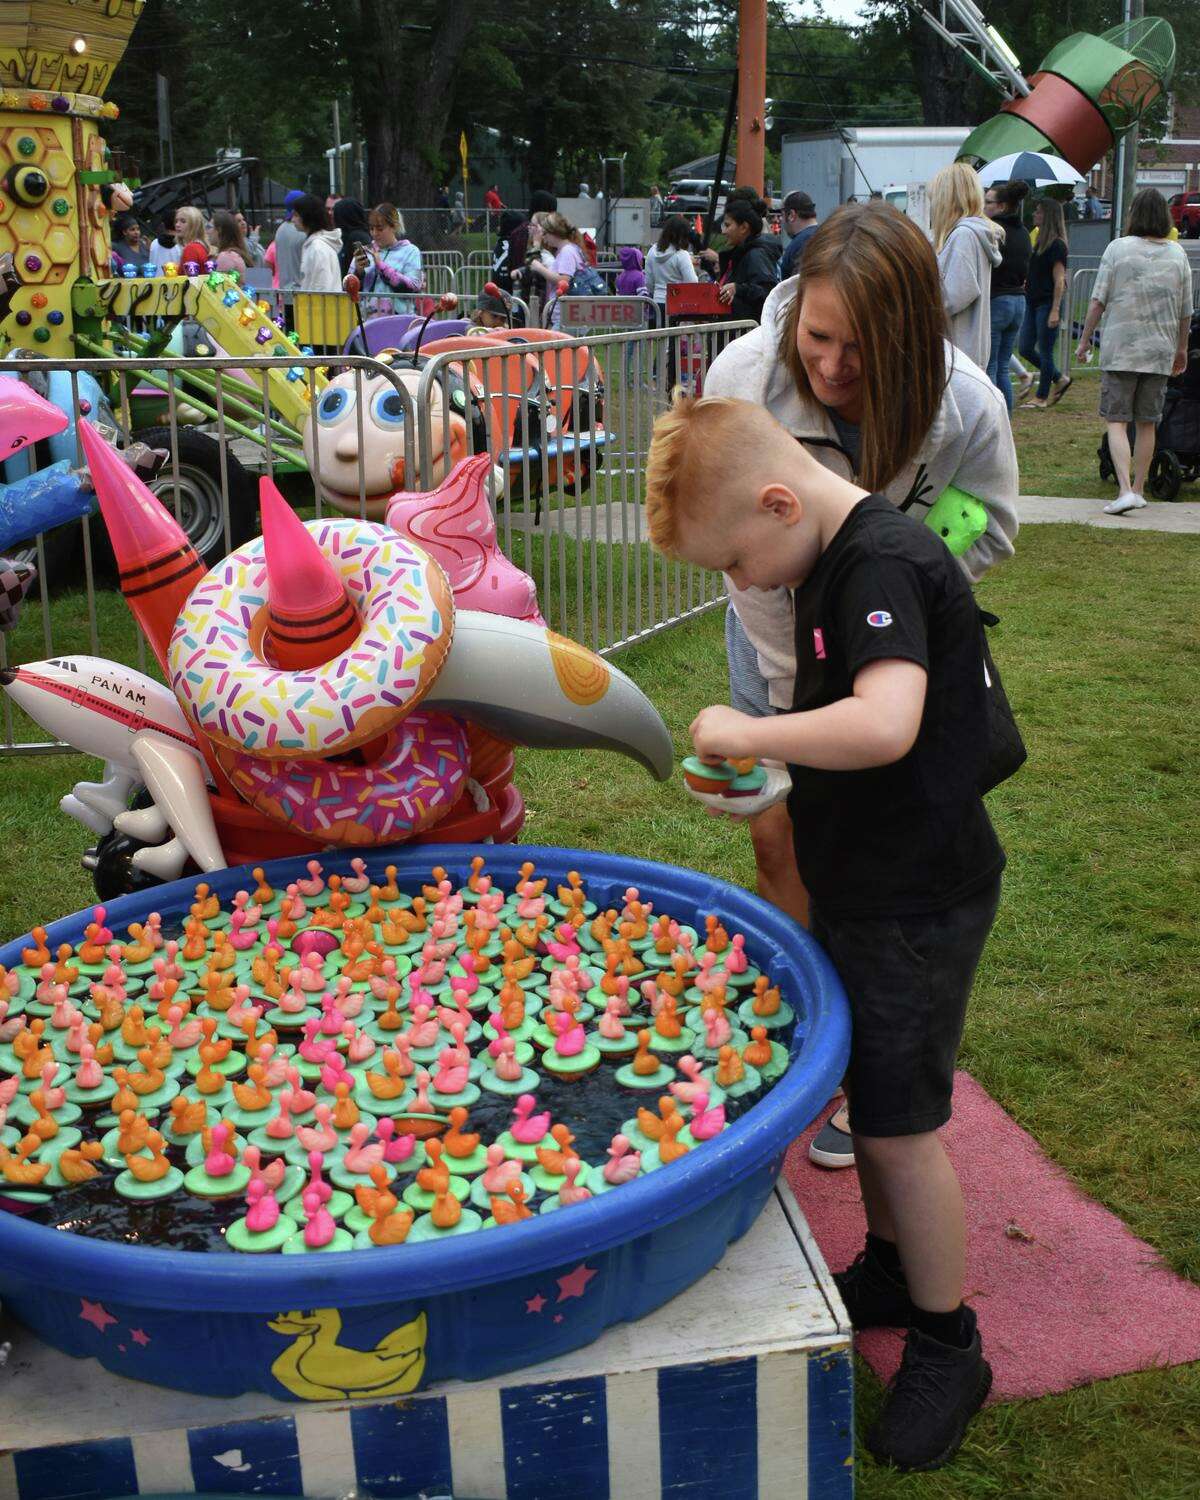 The Winsted Fire Department will hold its annual Fireman's Carnival at 75 Rowley Street, Winsted, opening at 6 p.m. Aug. 24.